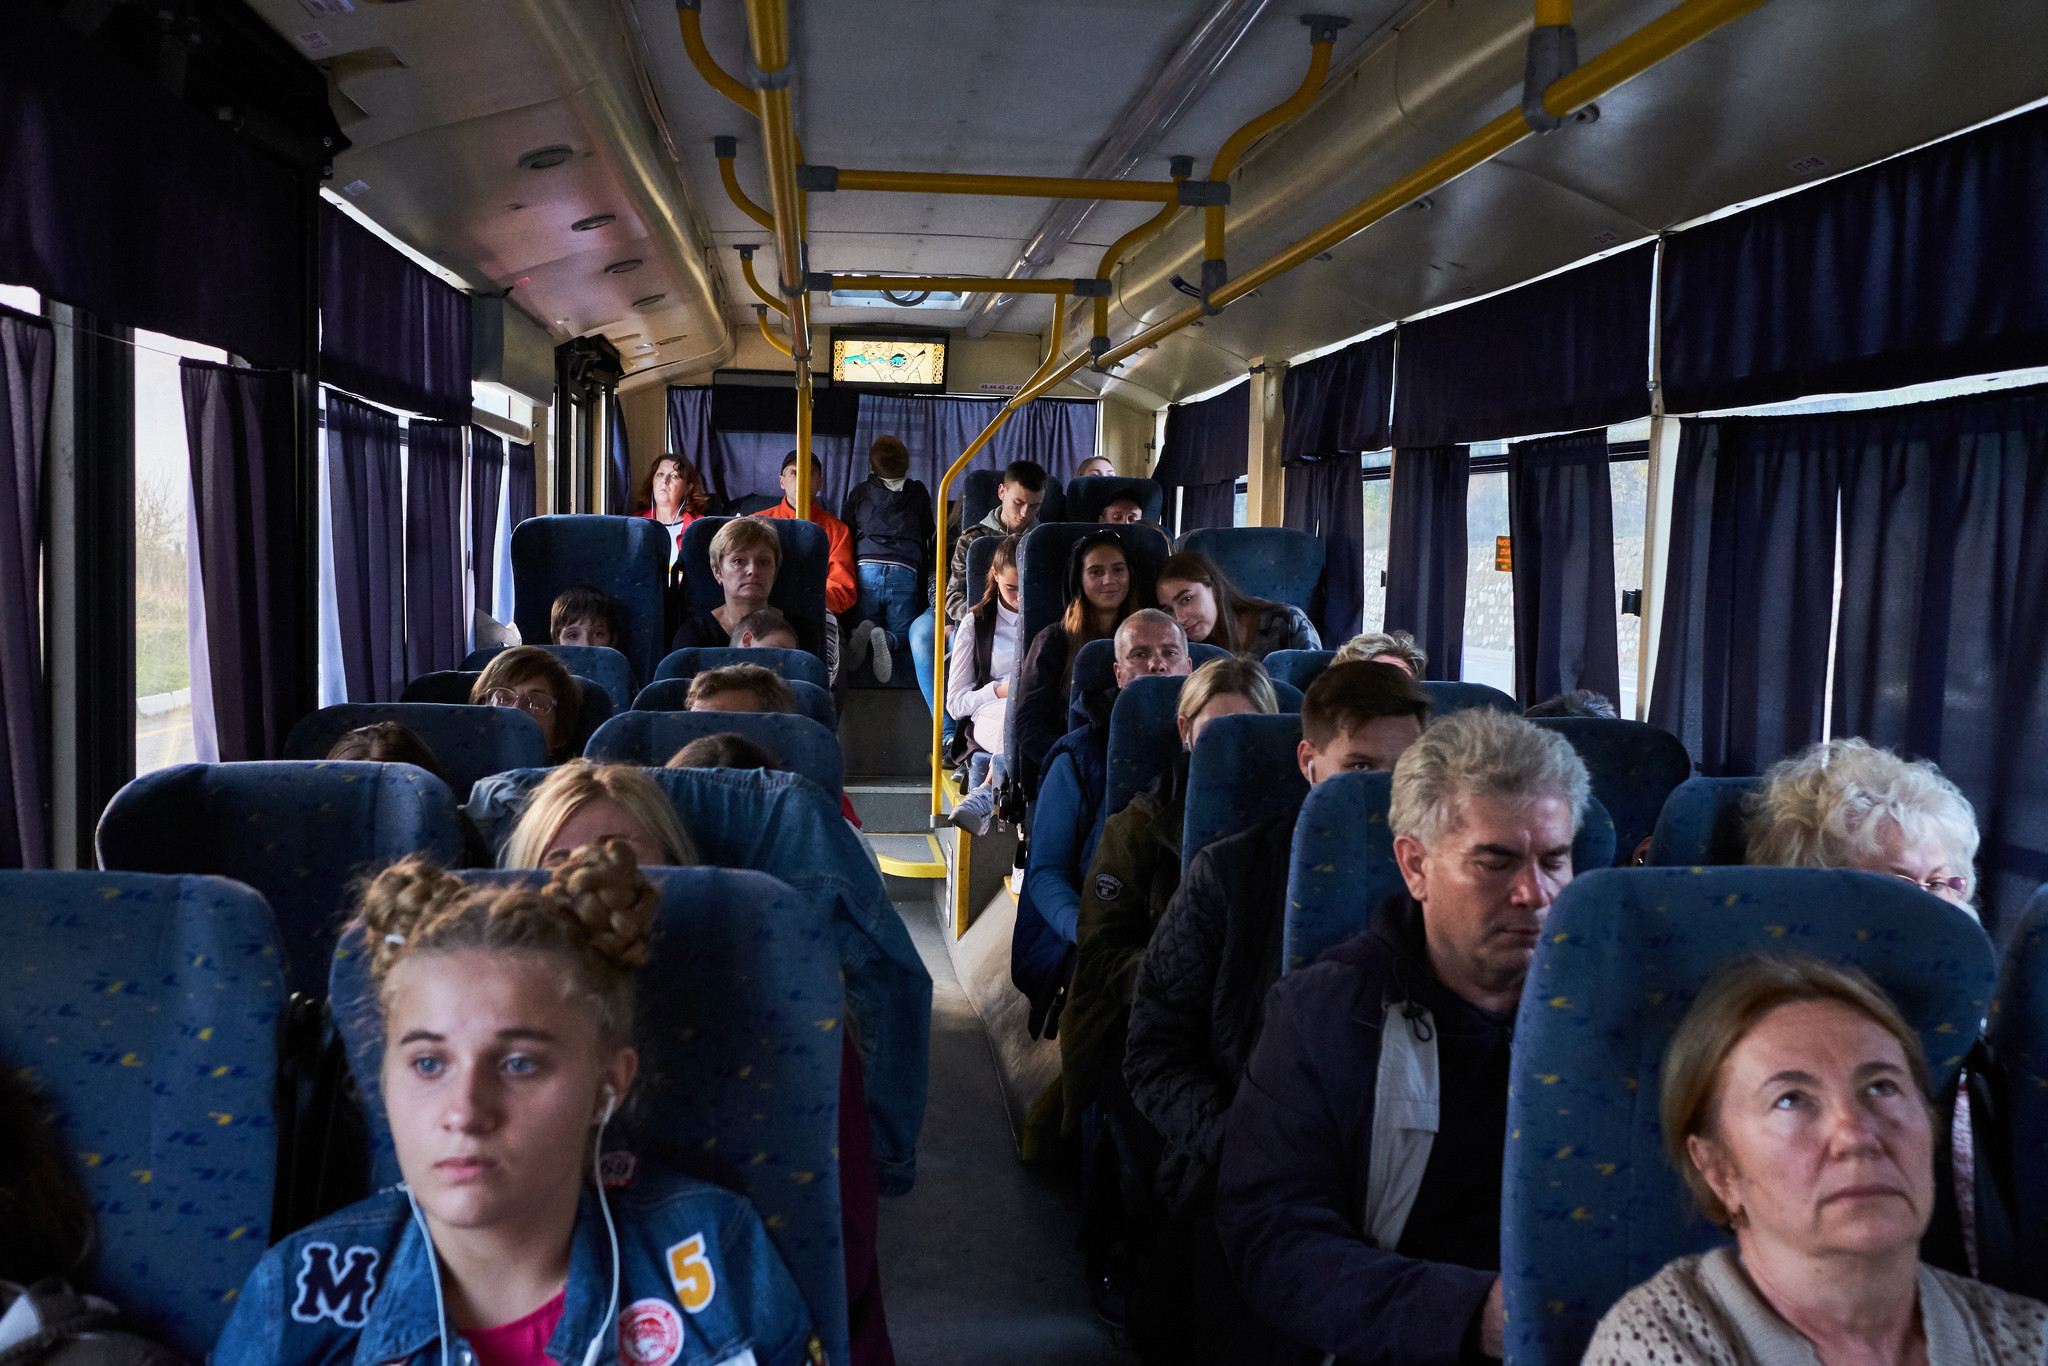 The passengers are sitting inside the trolleybus that goes from Yalta to Simferopol, the Crieman cap